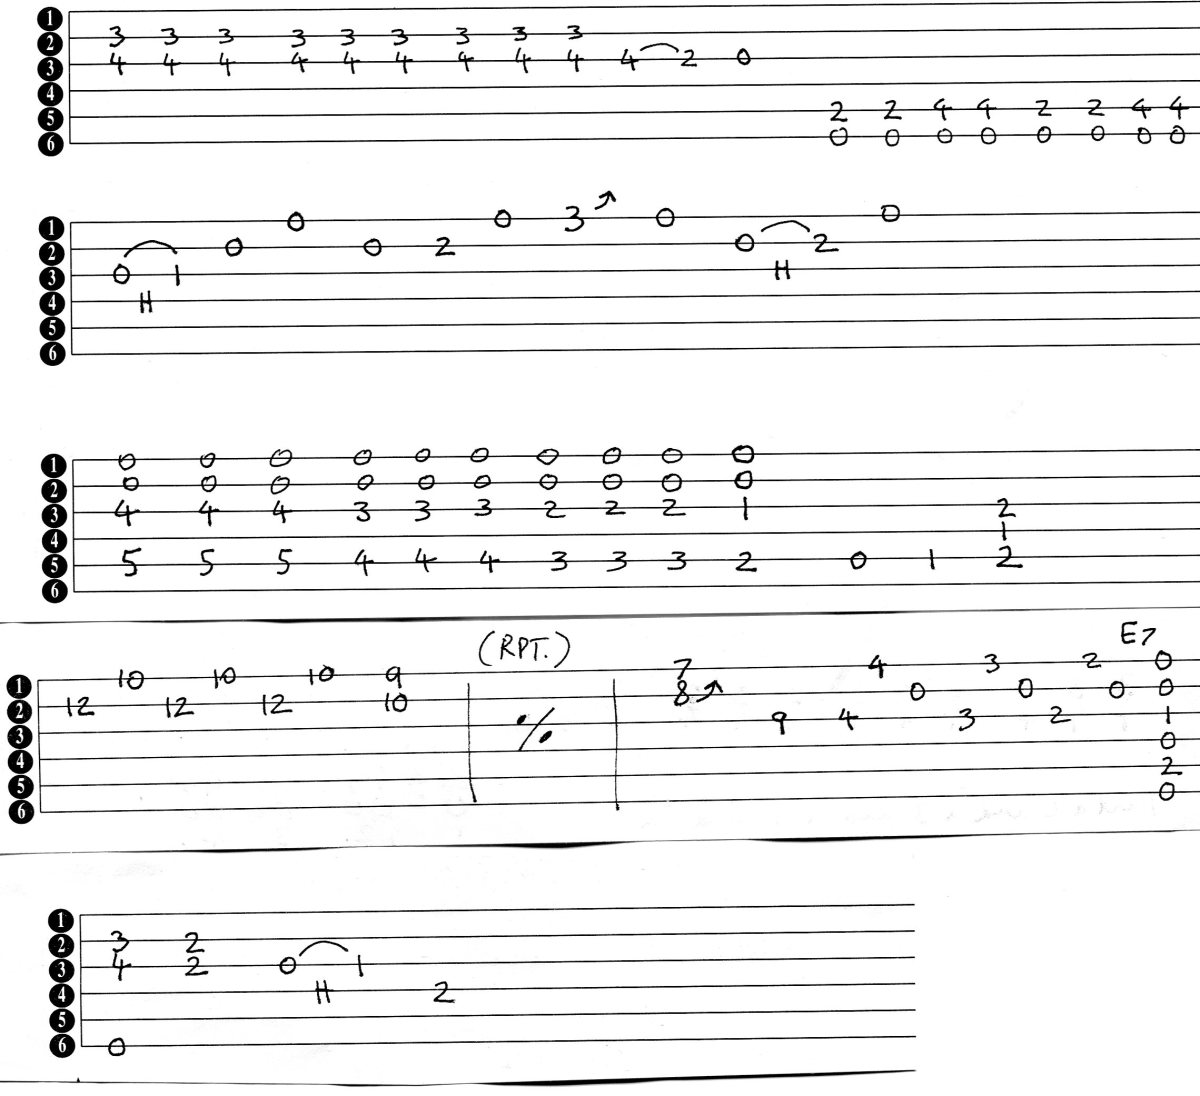 Guitar tab and guitar chords for playing Blues. 